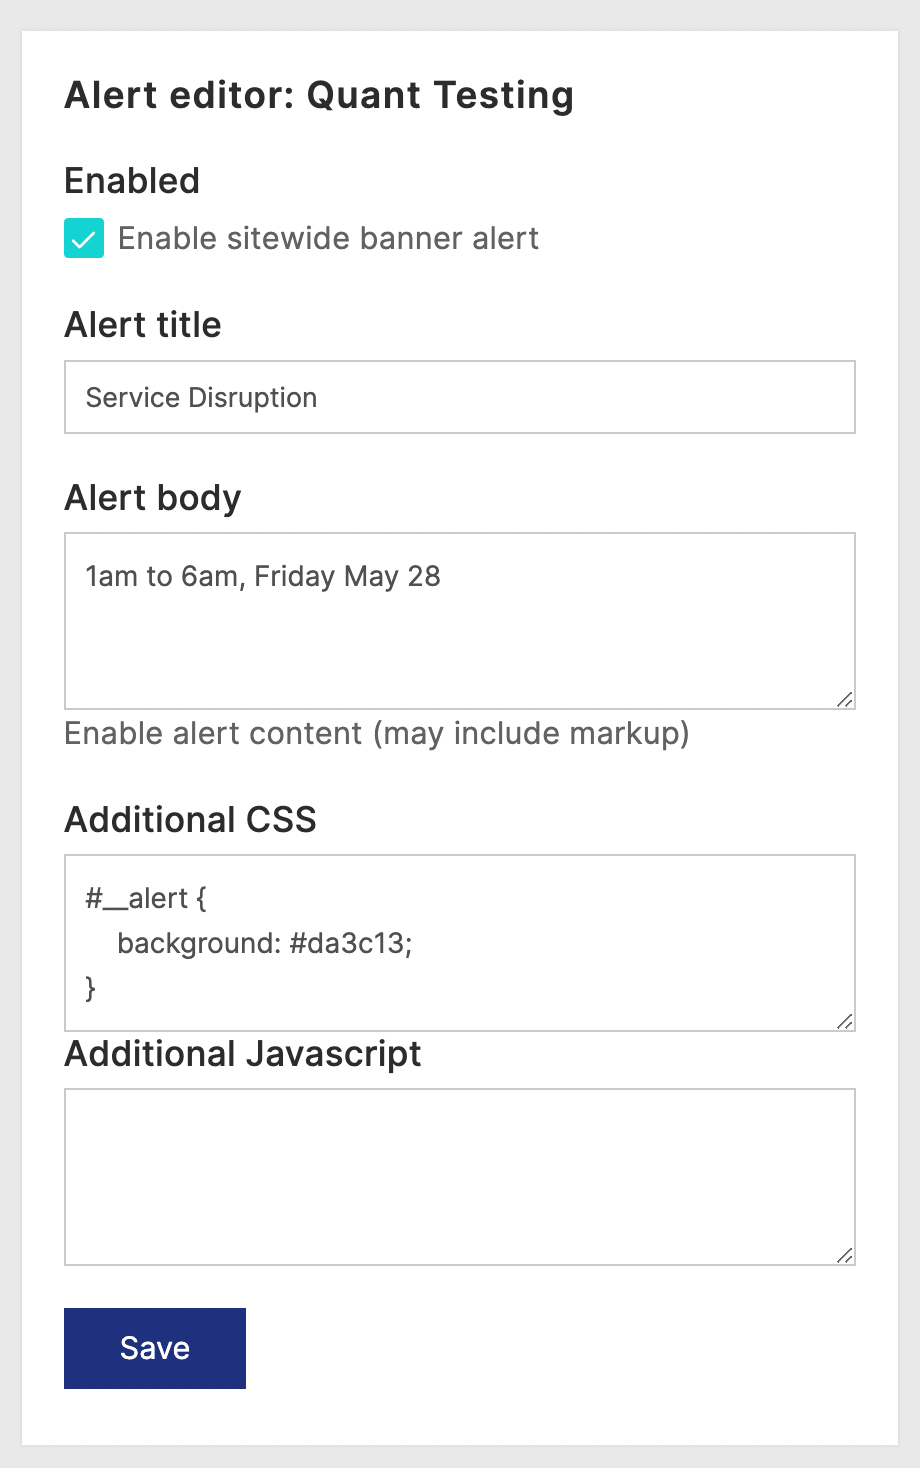 Quant Alert editor for with background color CSS